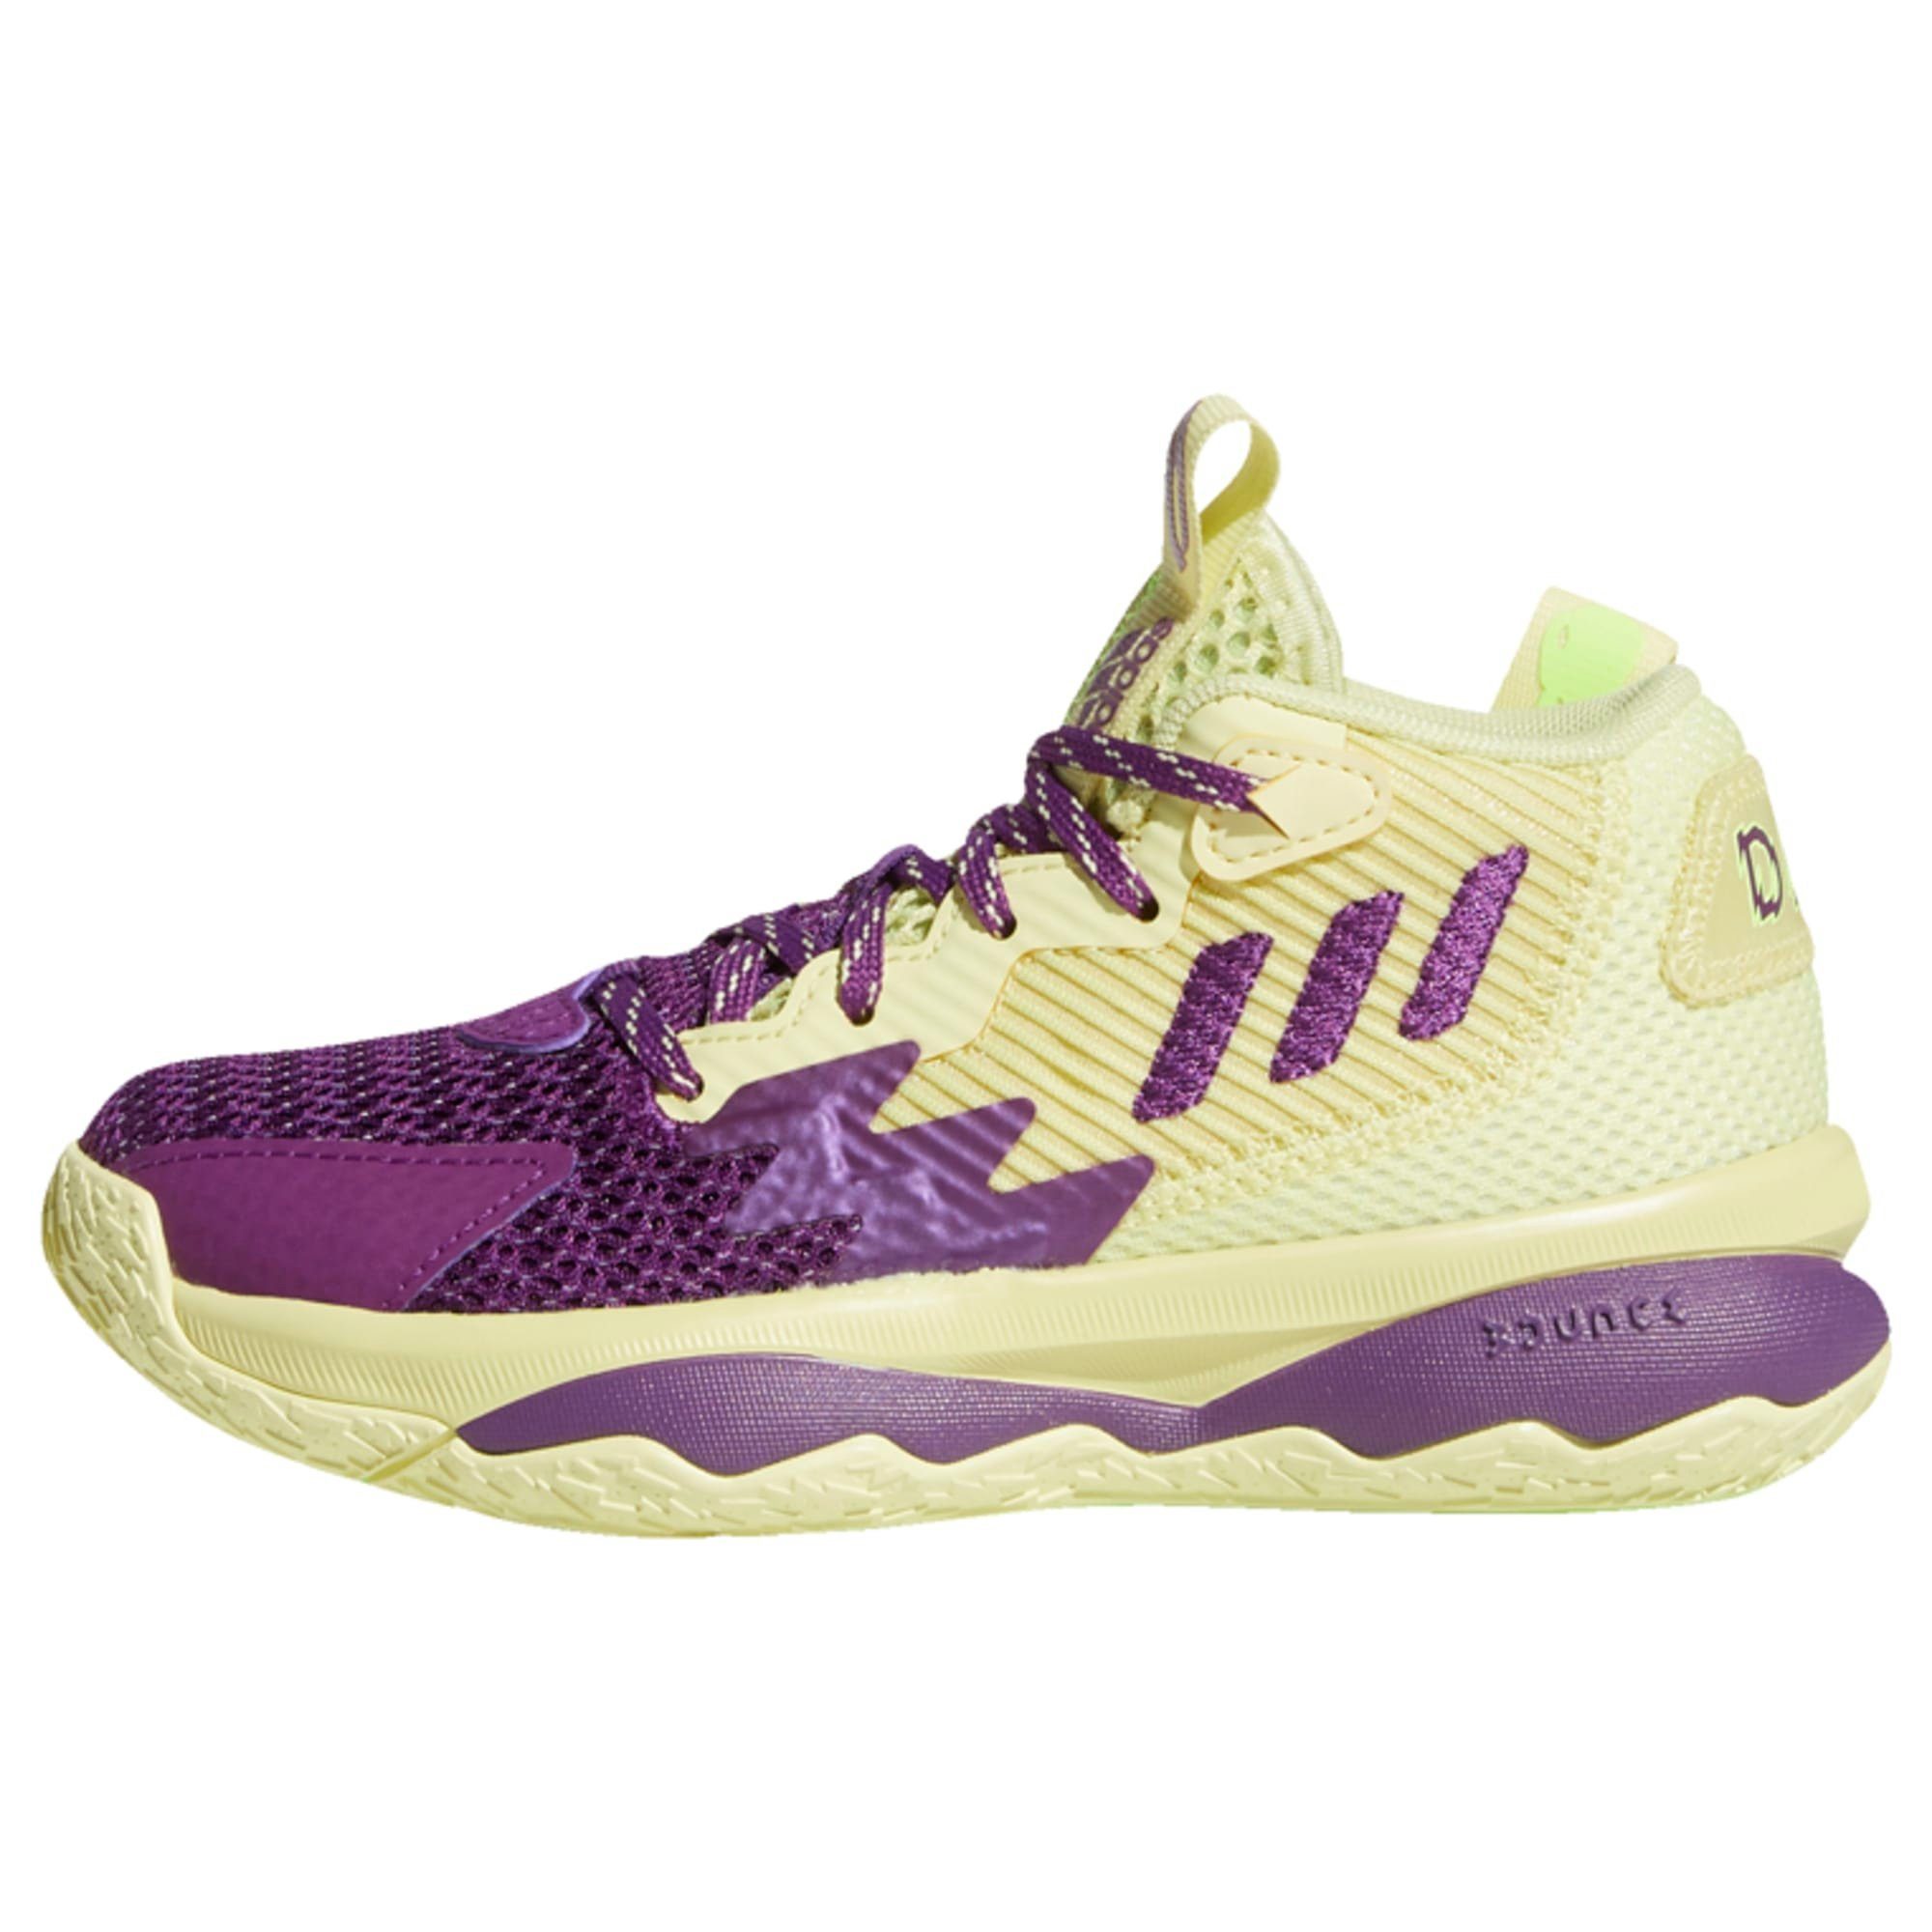 adidas Performance »Dame 8 Schuh« Fitnessschuh | OTTO